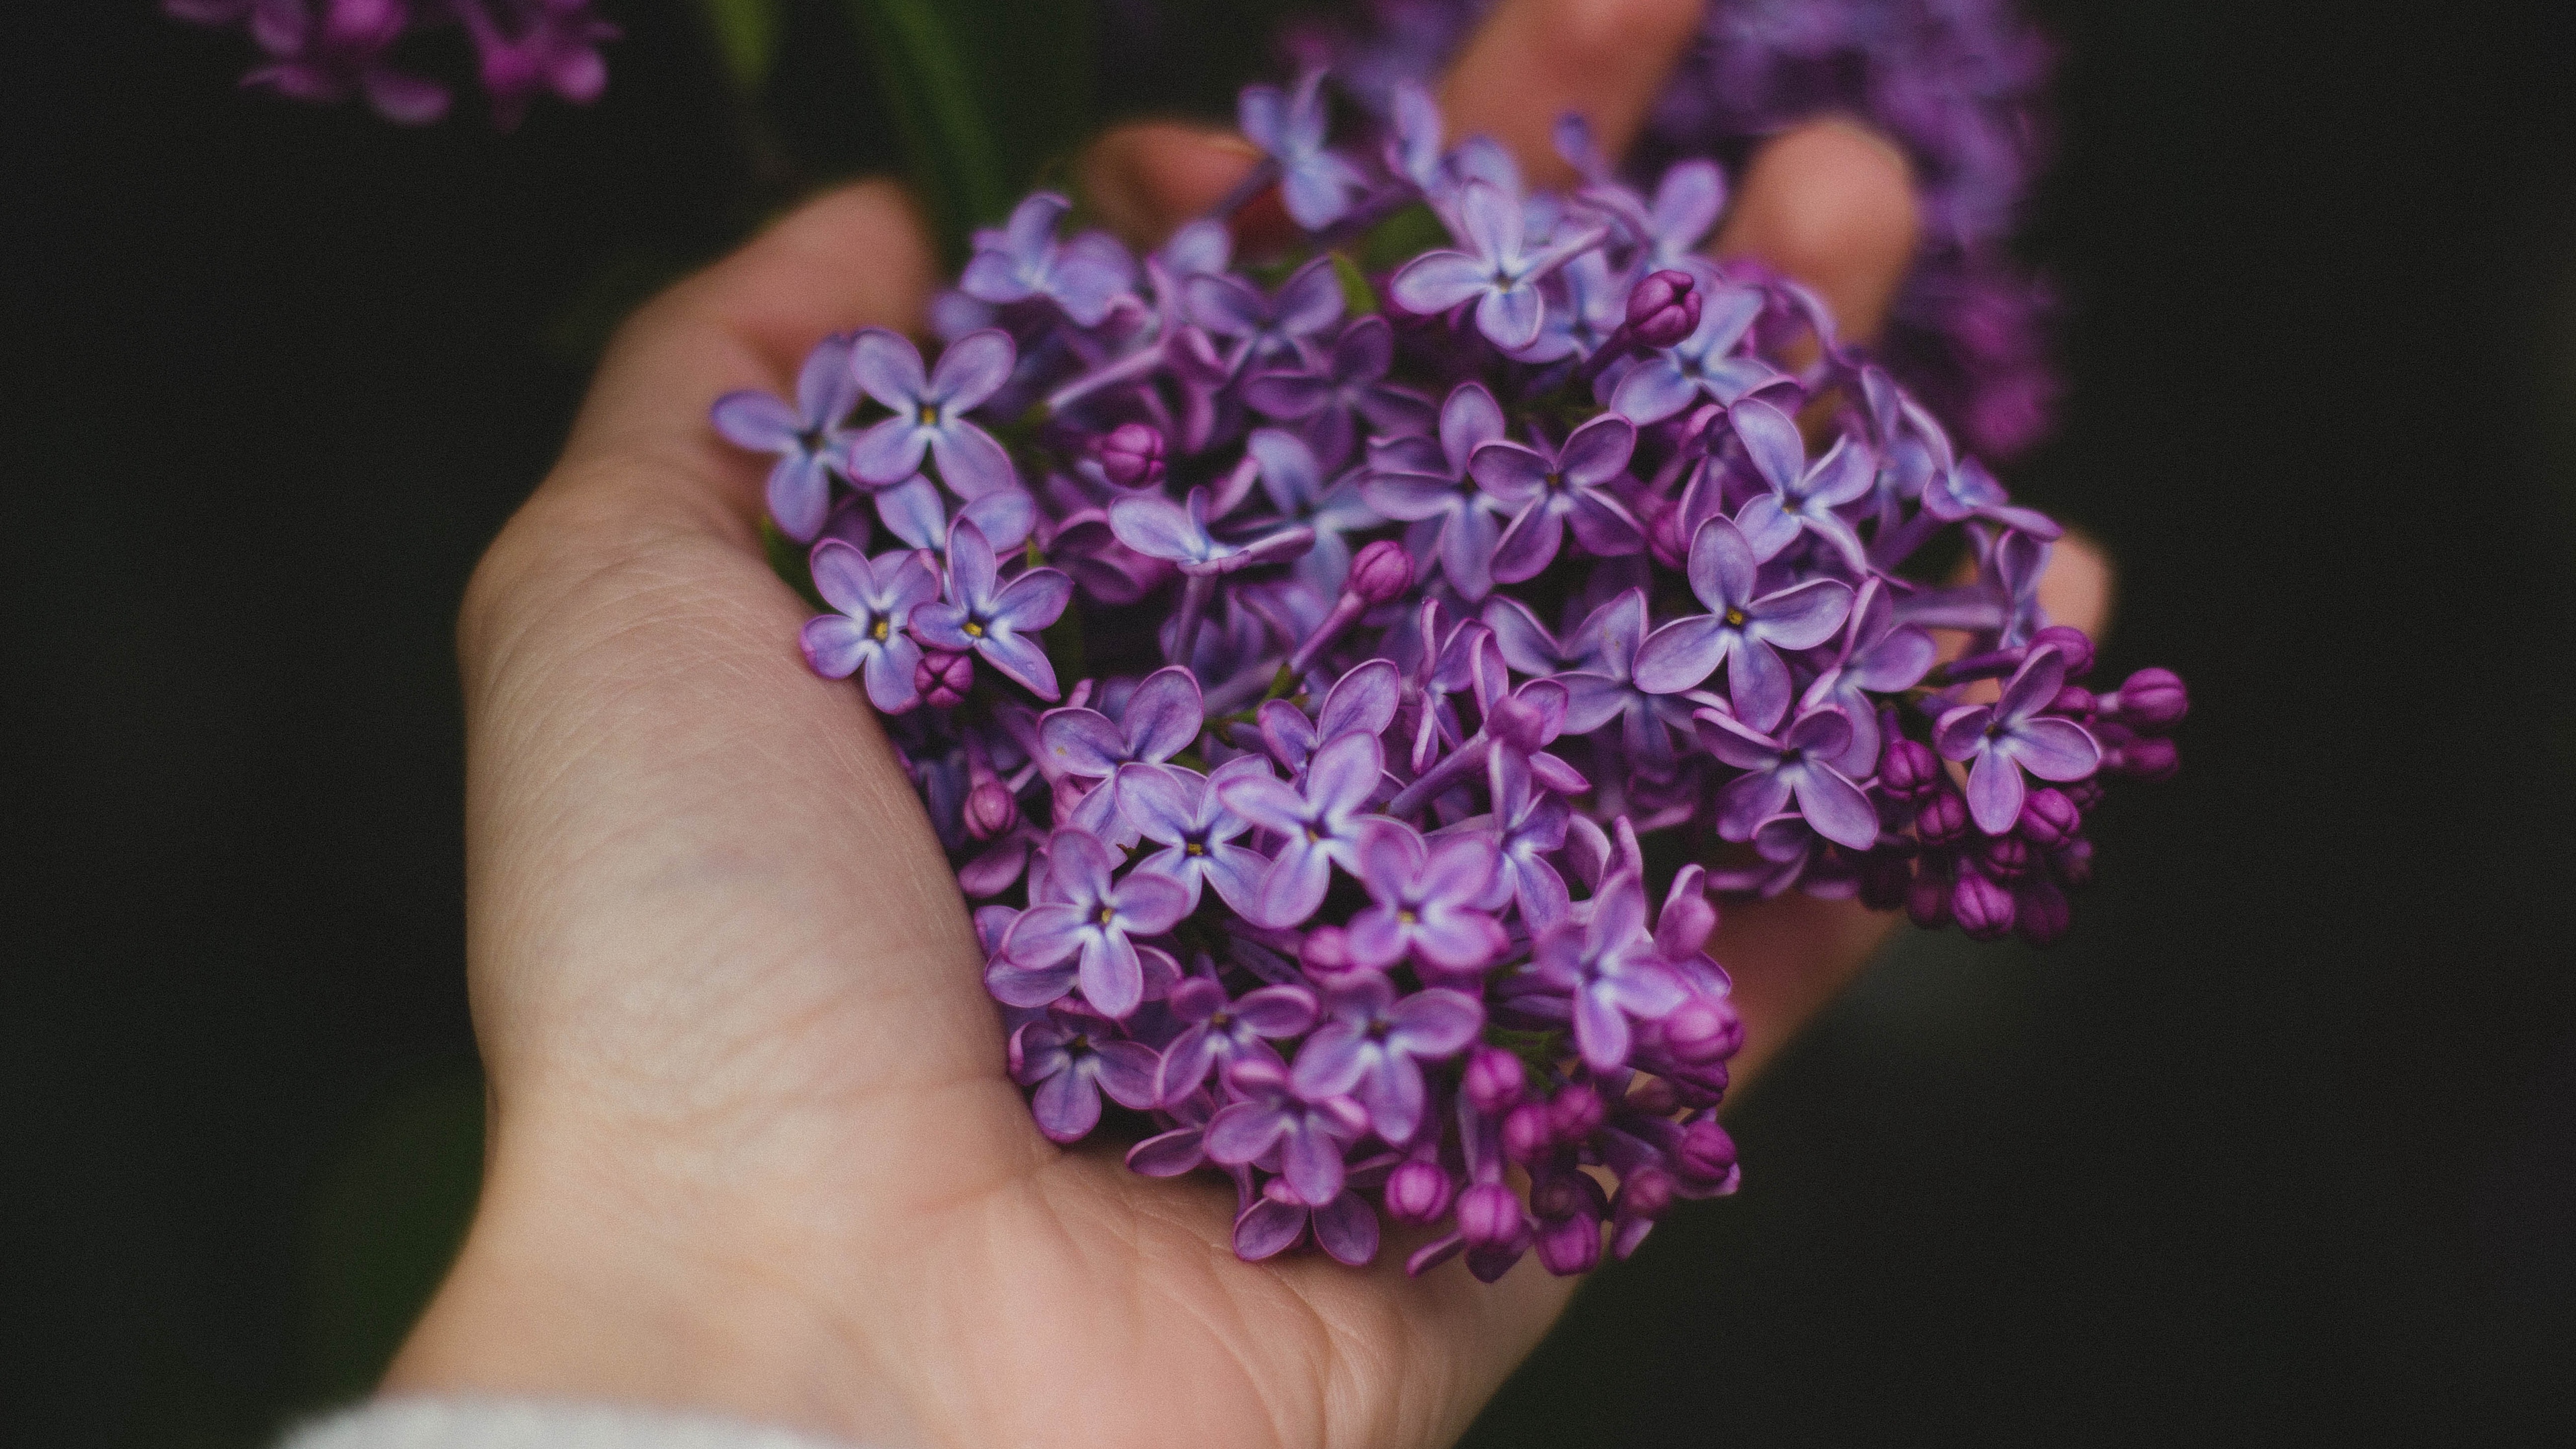 Wallpaper Lilac, Flowers, Hand - Purple Flower With Hand - HD Wallpaper 